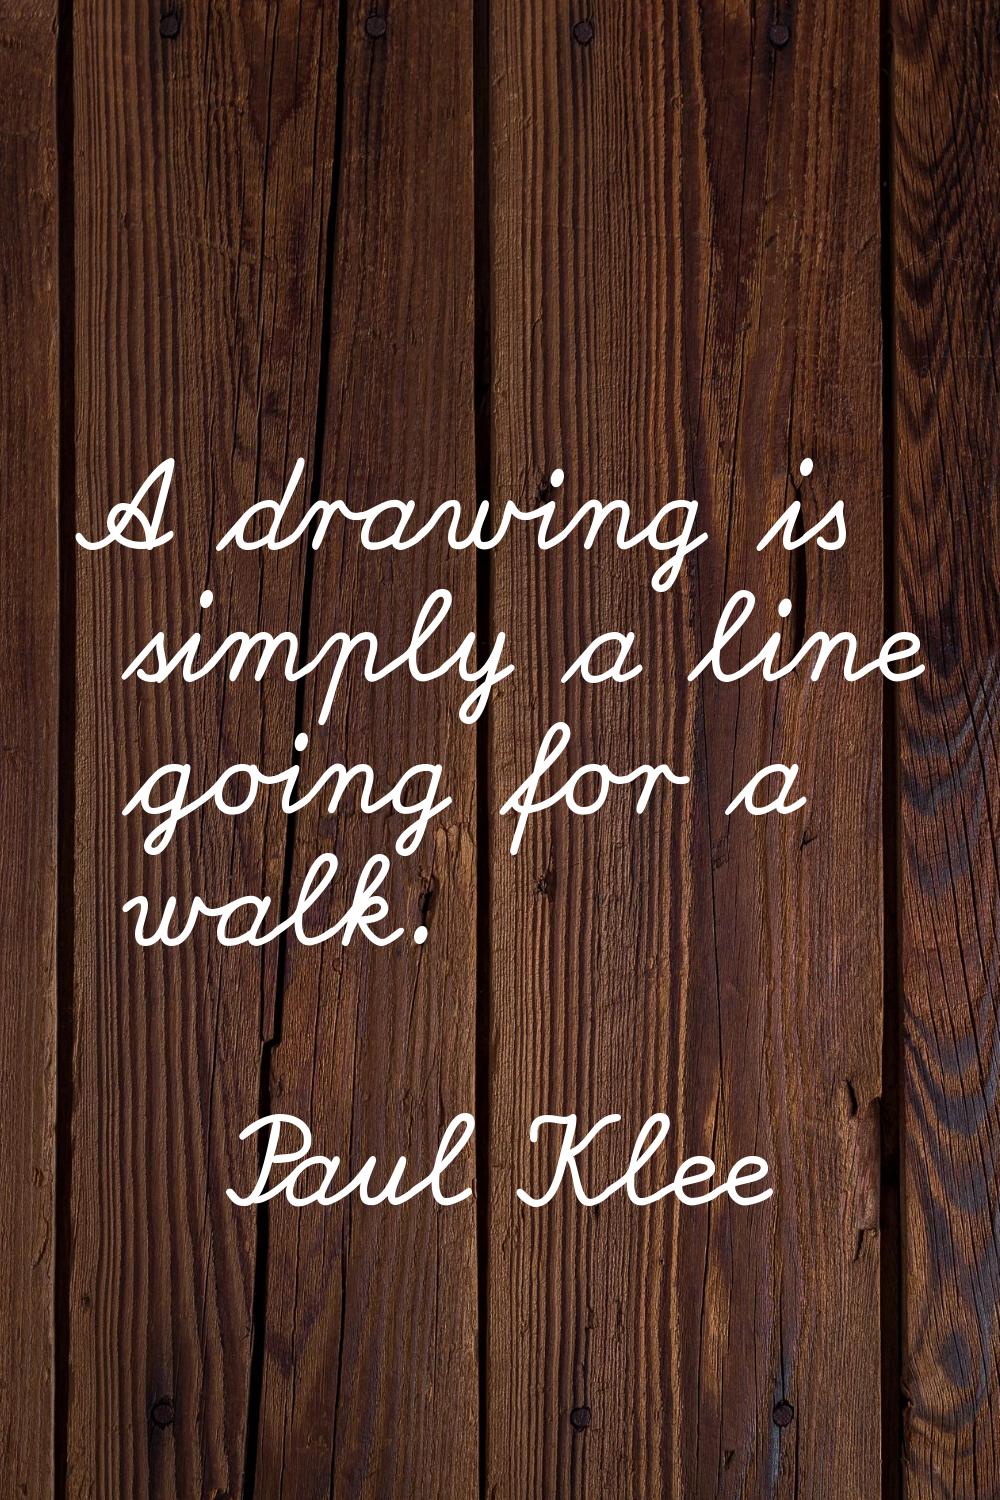 A drawing is simply a line going for a walk.